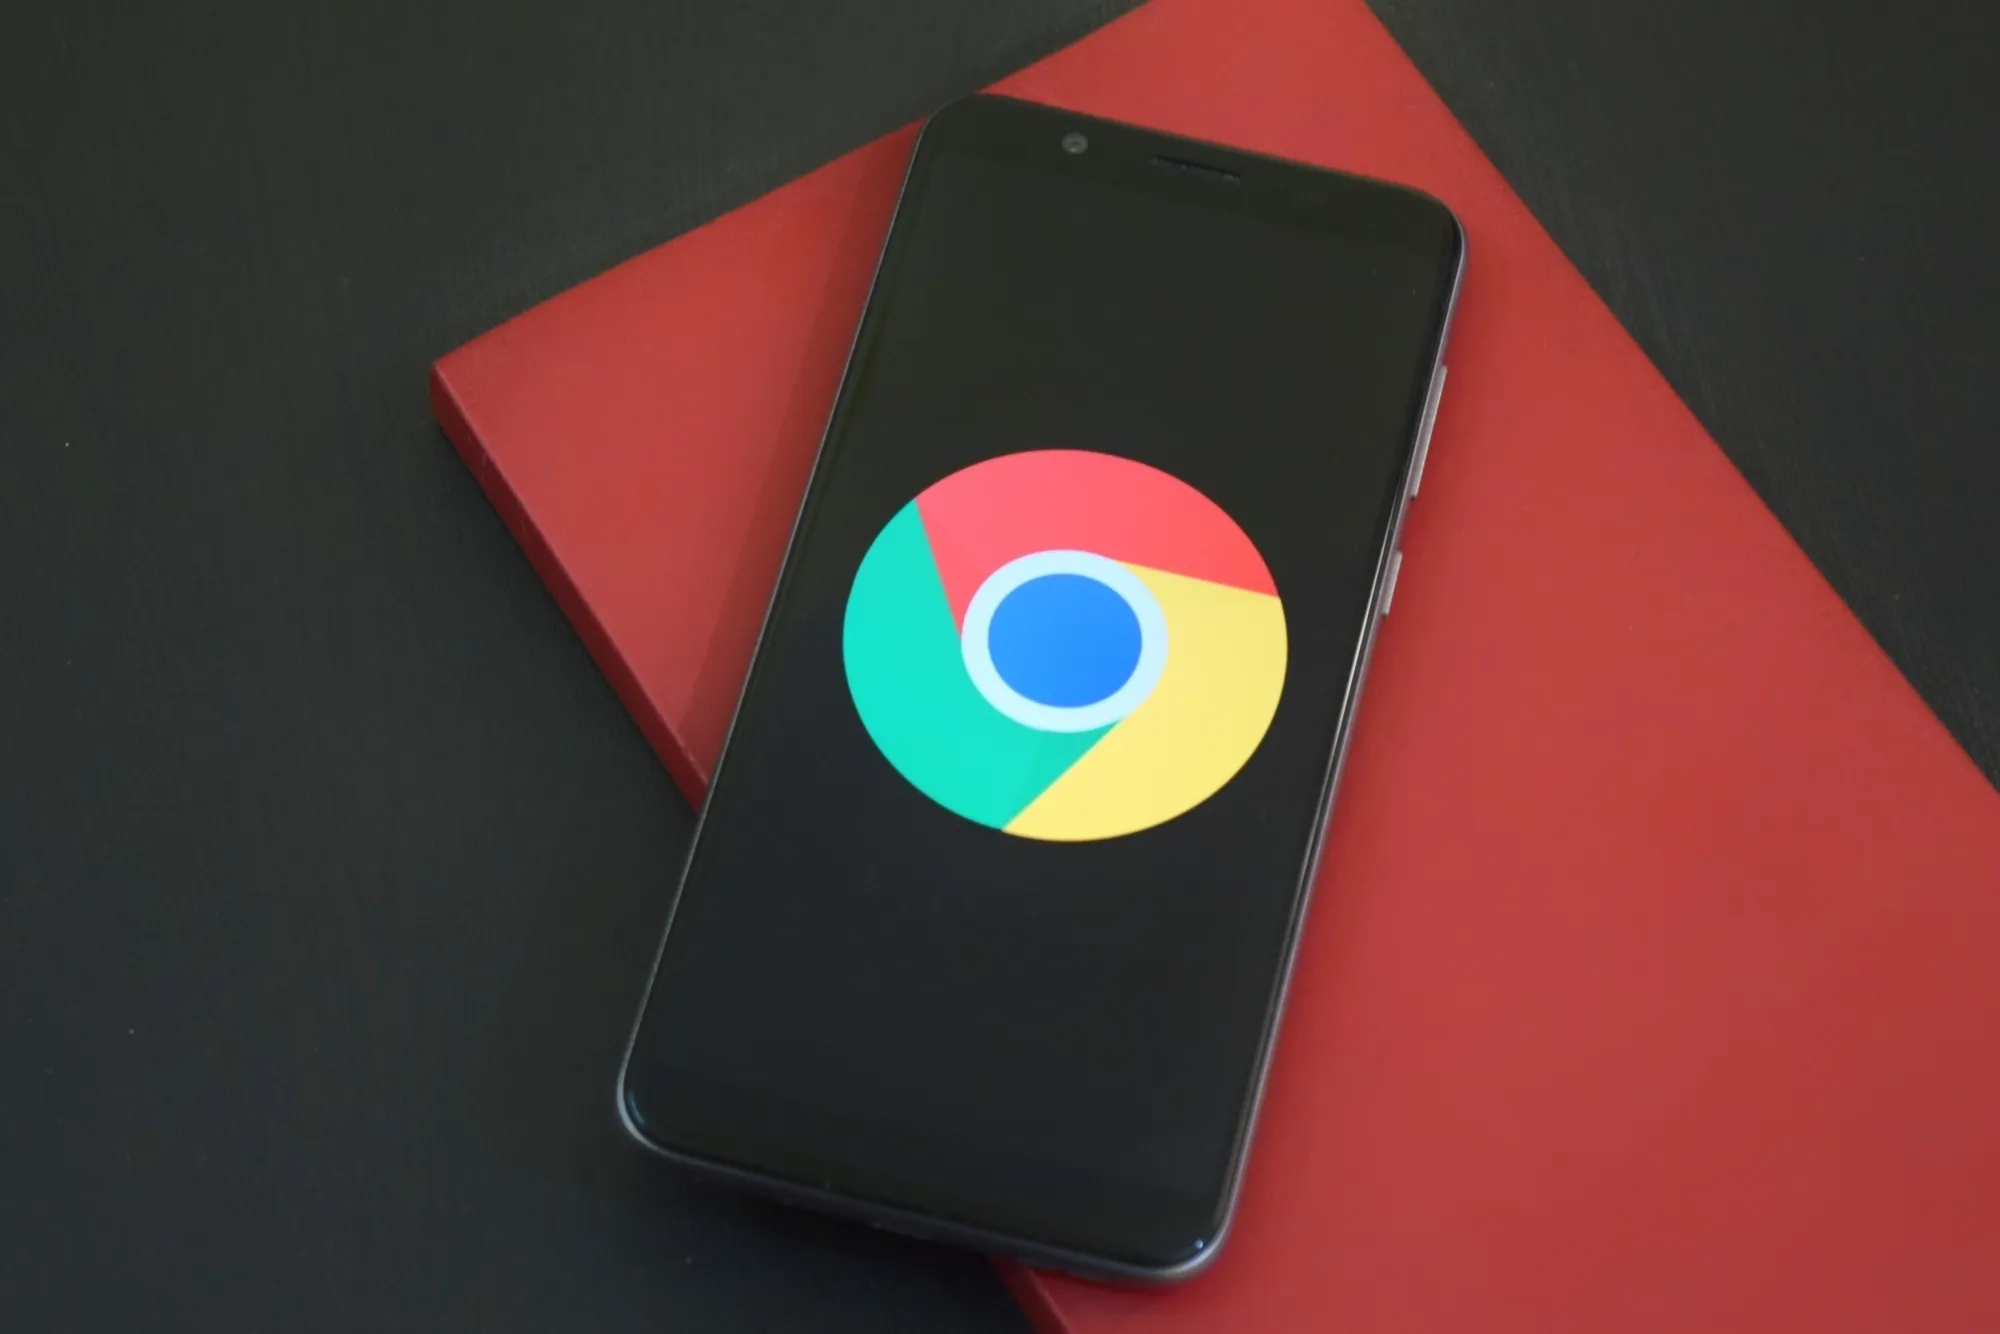 Chrome for Android Now Allows You to Lock Your Private Browsing Session.